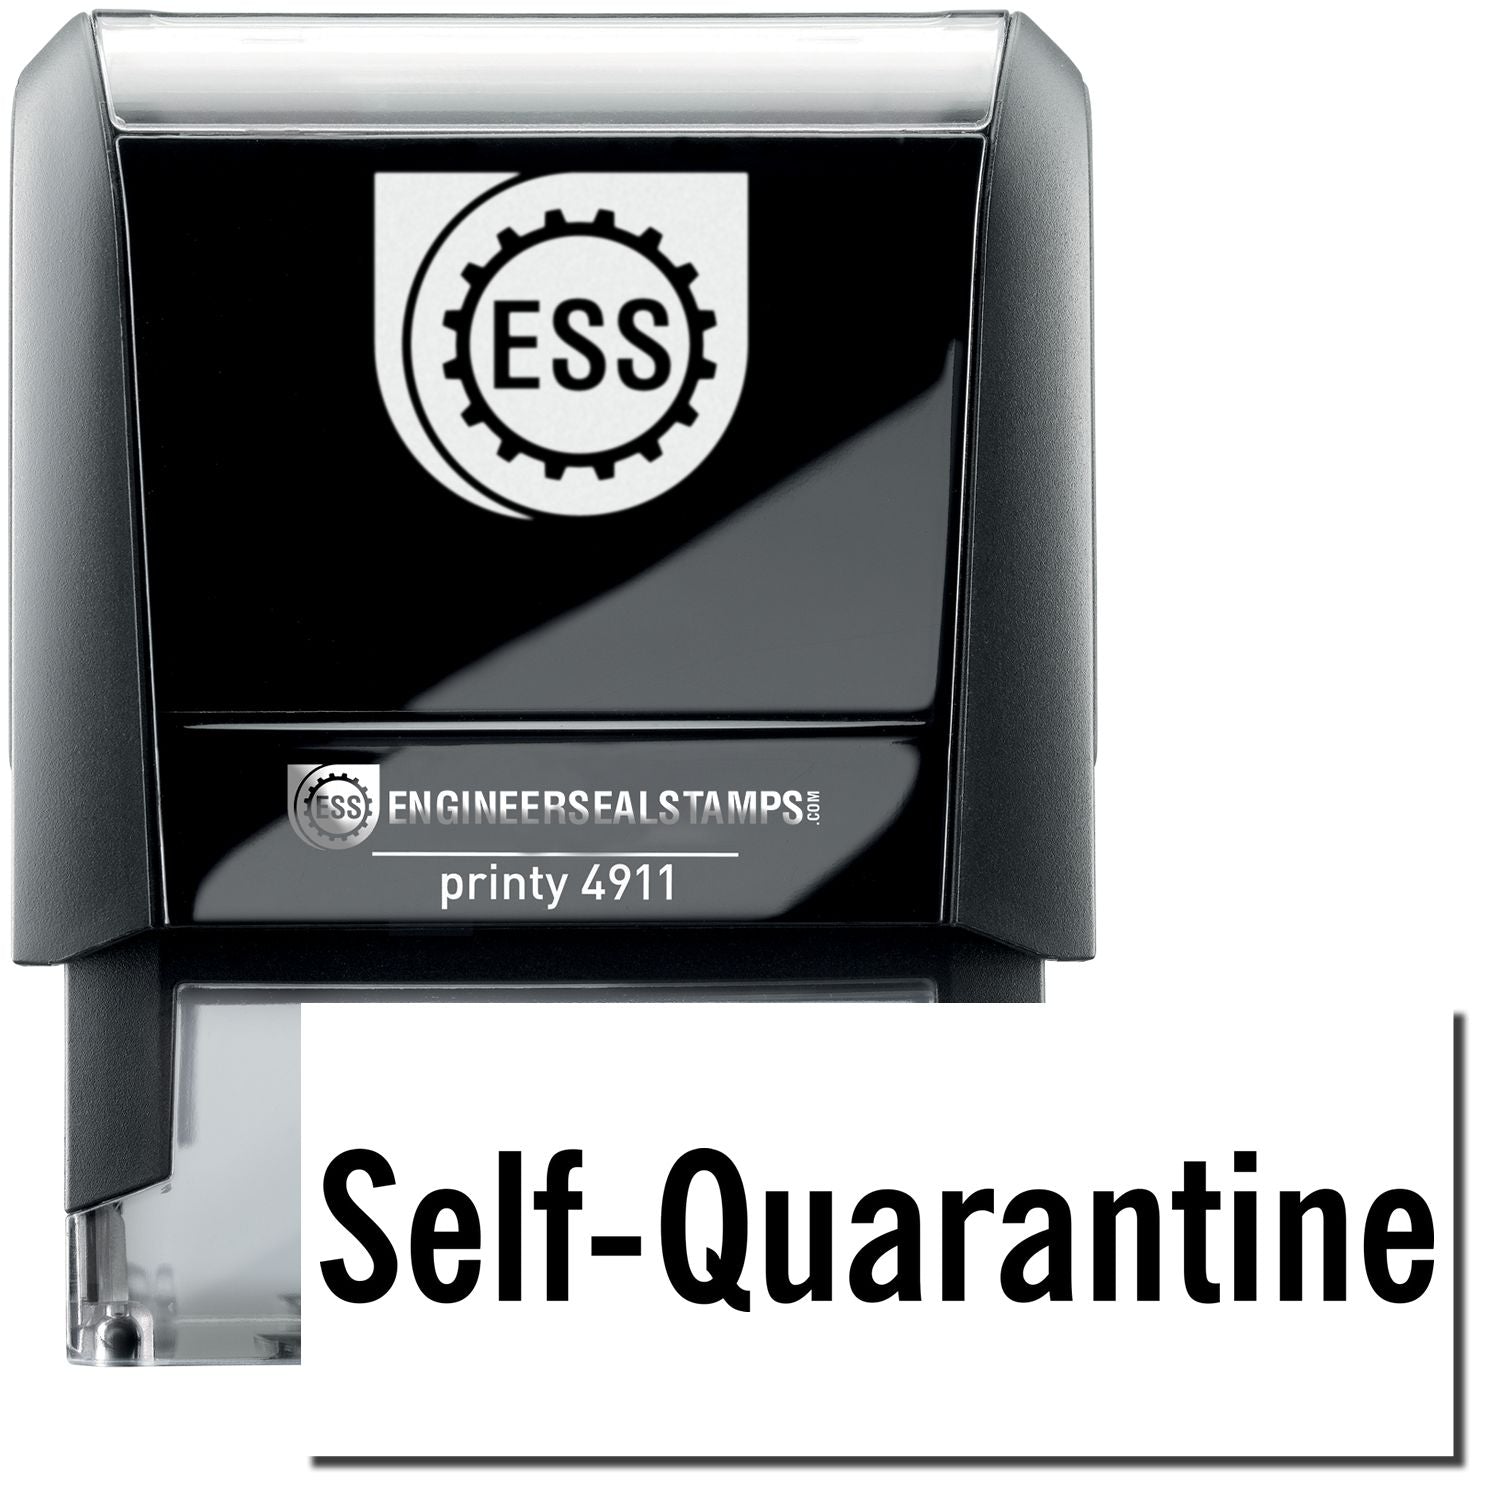 A self-inking stamp with a stamped image showing how the text "Self-Quarantine" is displayed after stamping.